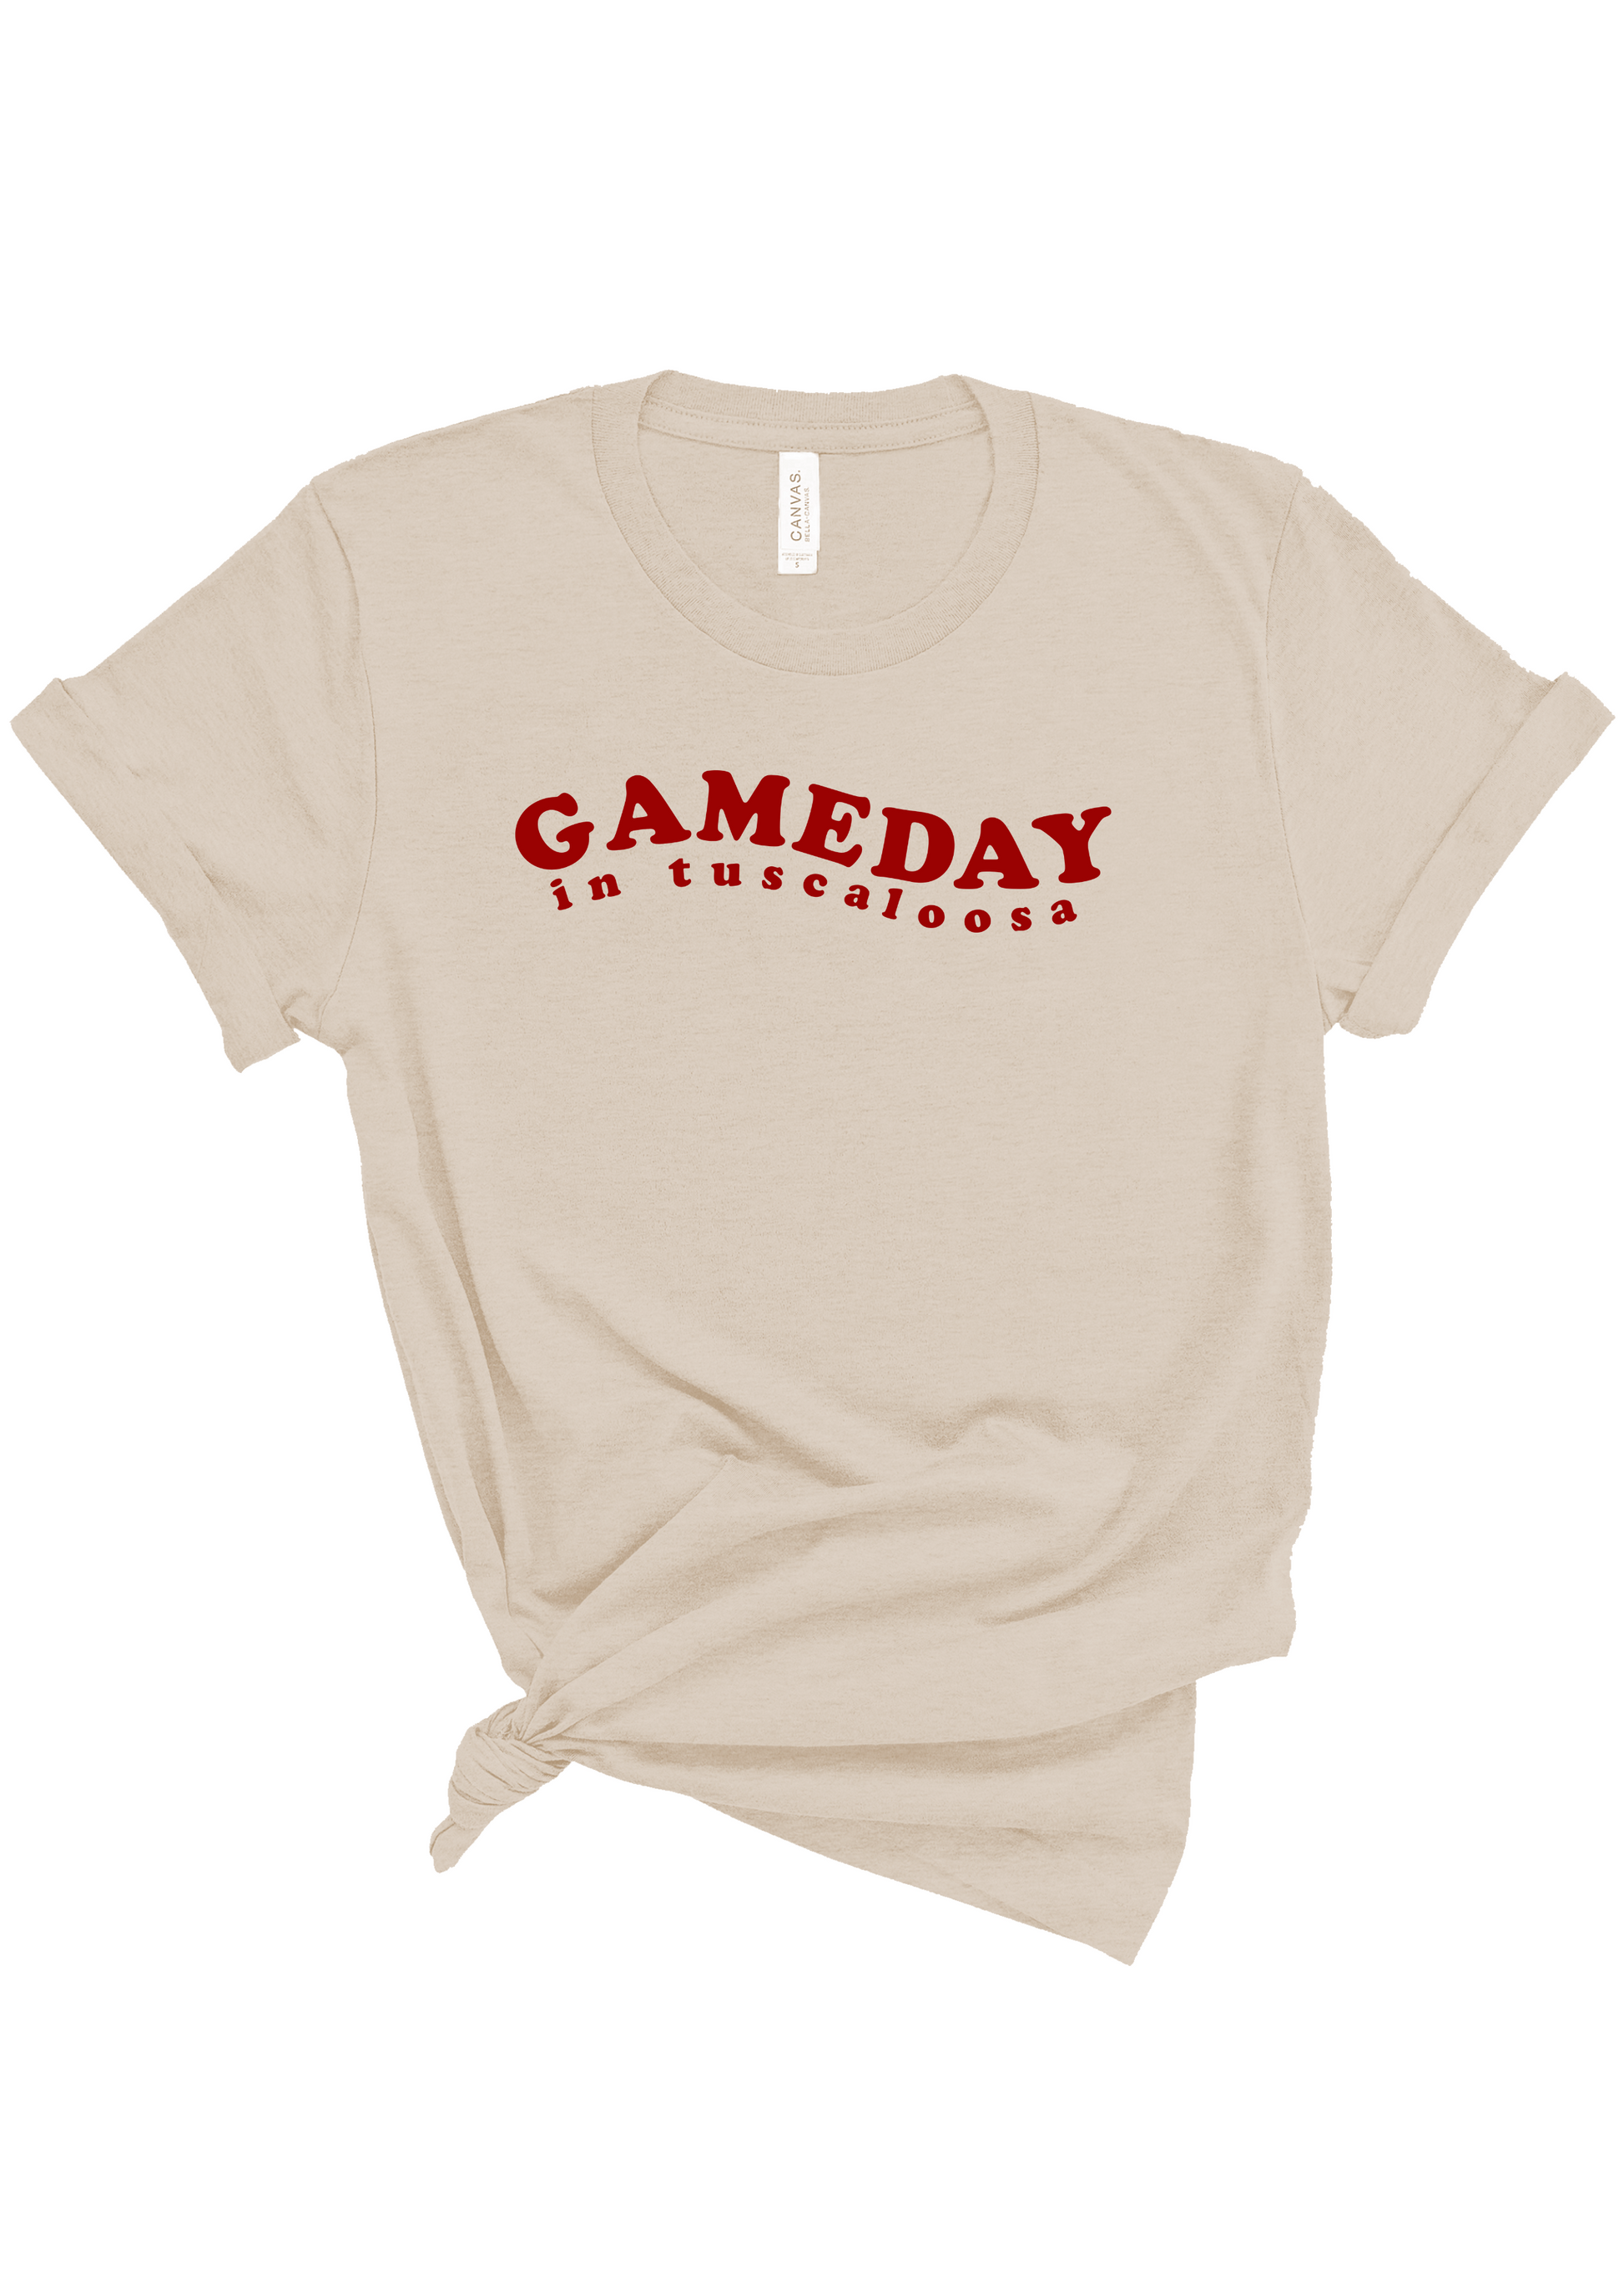 Gameday in Tuscaloosa | Adult Tee-Adult Tee-Sister Shirts-Sister Shirts, Cute & Custom Tees for Mama & Littles in Trussville, Alabama.